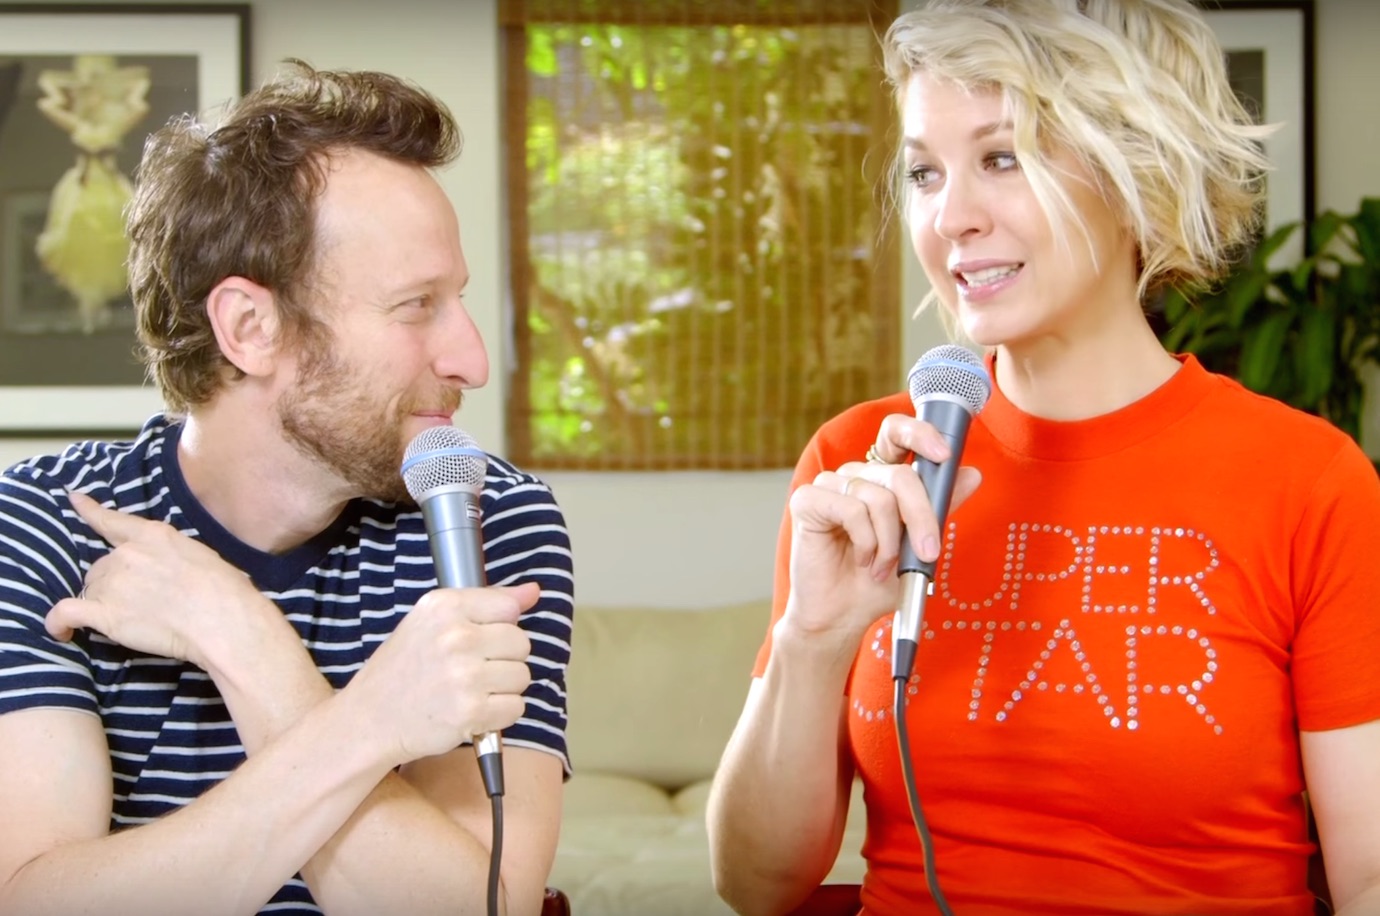 Getting real with Jenna + Bodhi Elfman about parenting and relationships after kids | Spawned Episode 41